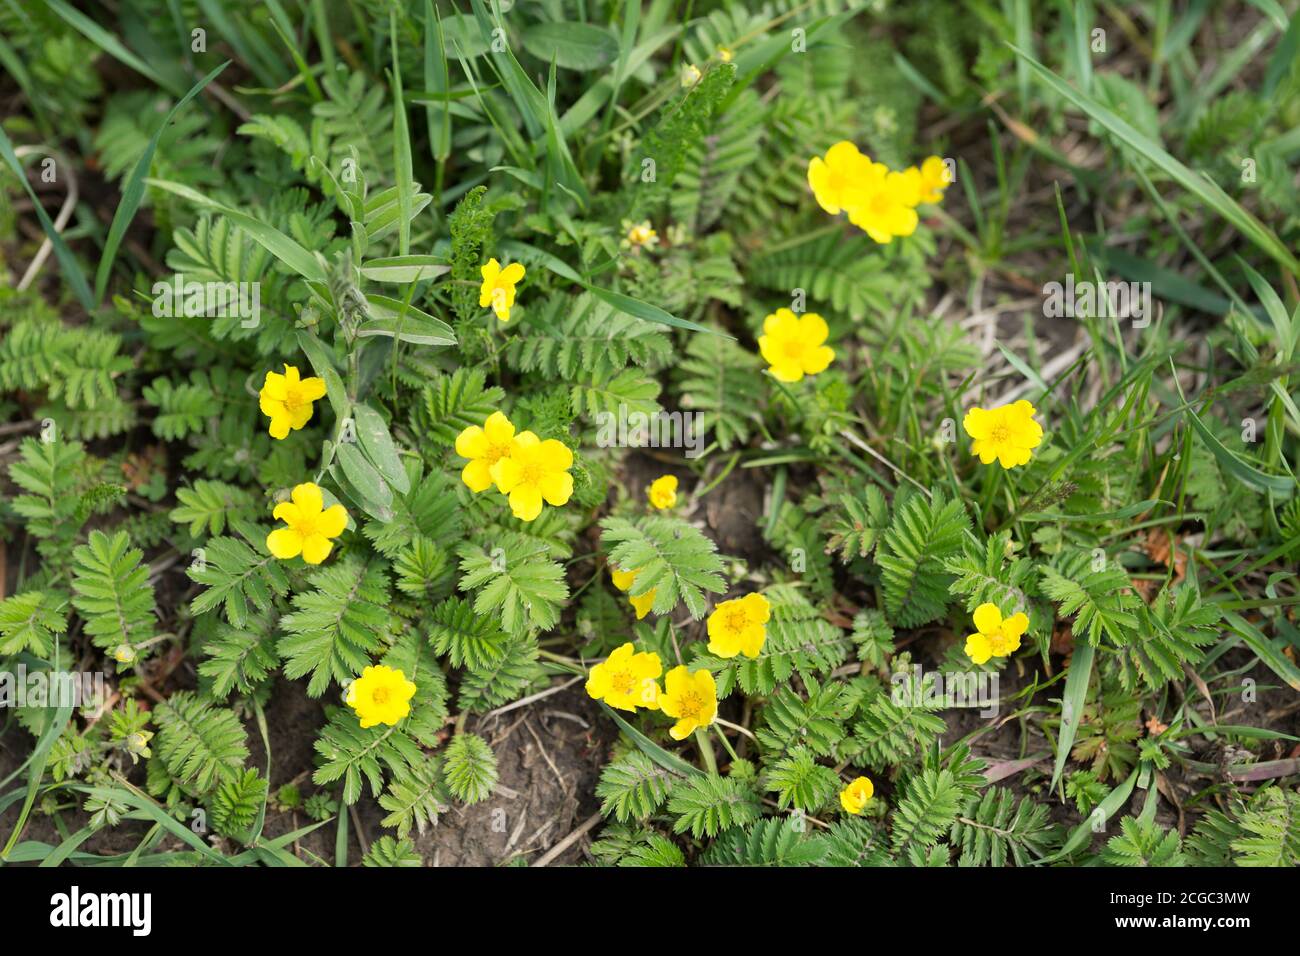 Pawtidae gooseneck, or goosefoot (Latin Potentilla anserina) with yellow flowers spreads on the ground. View from above. Stock Photo